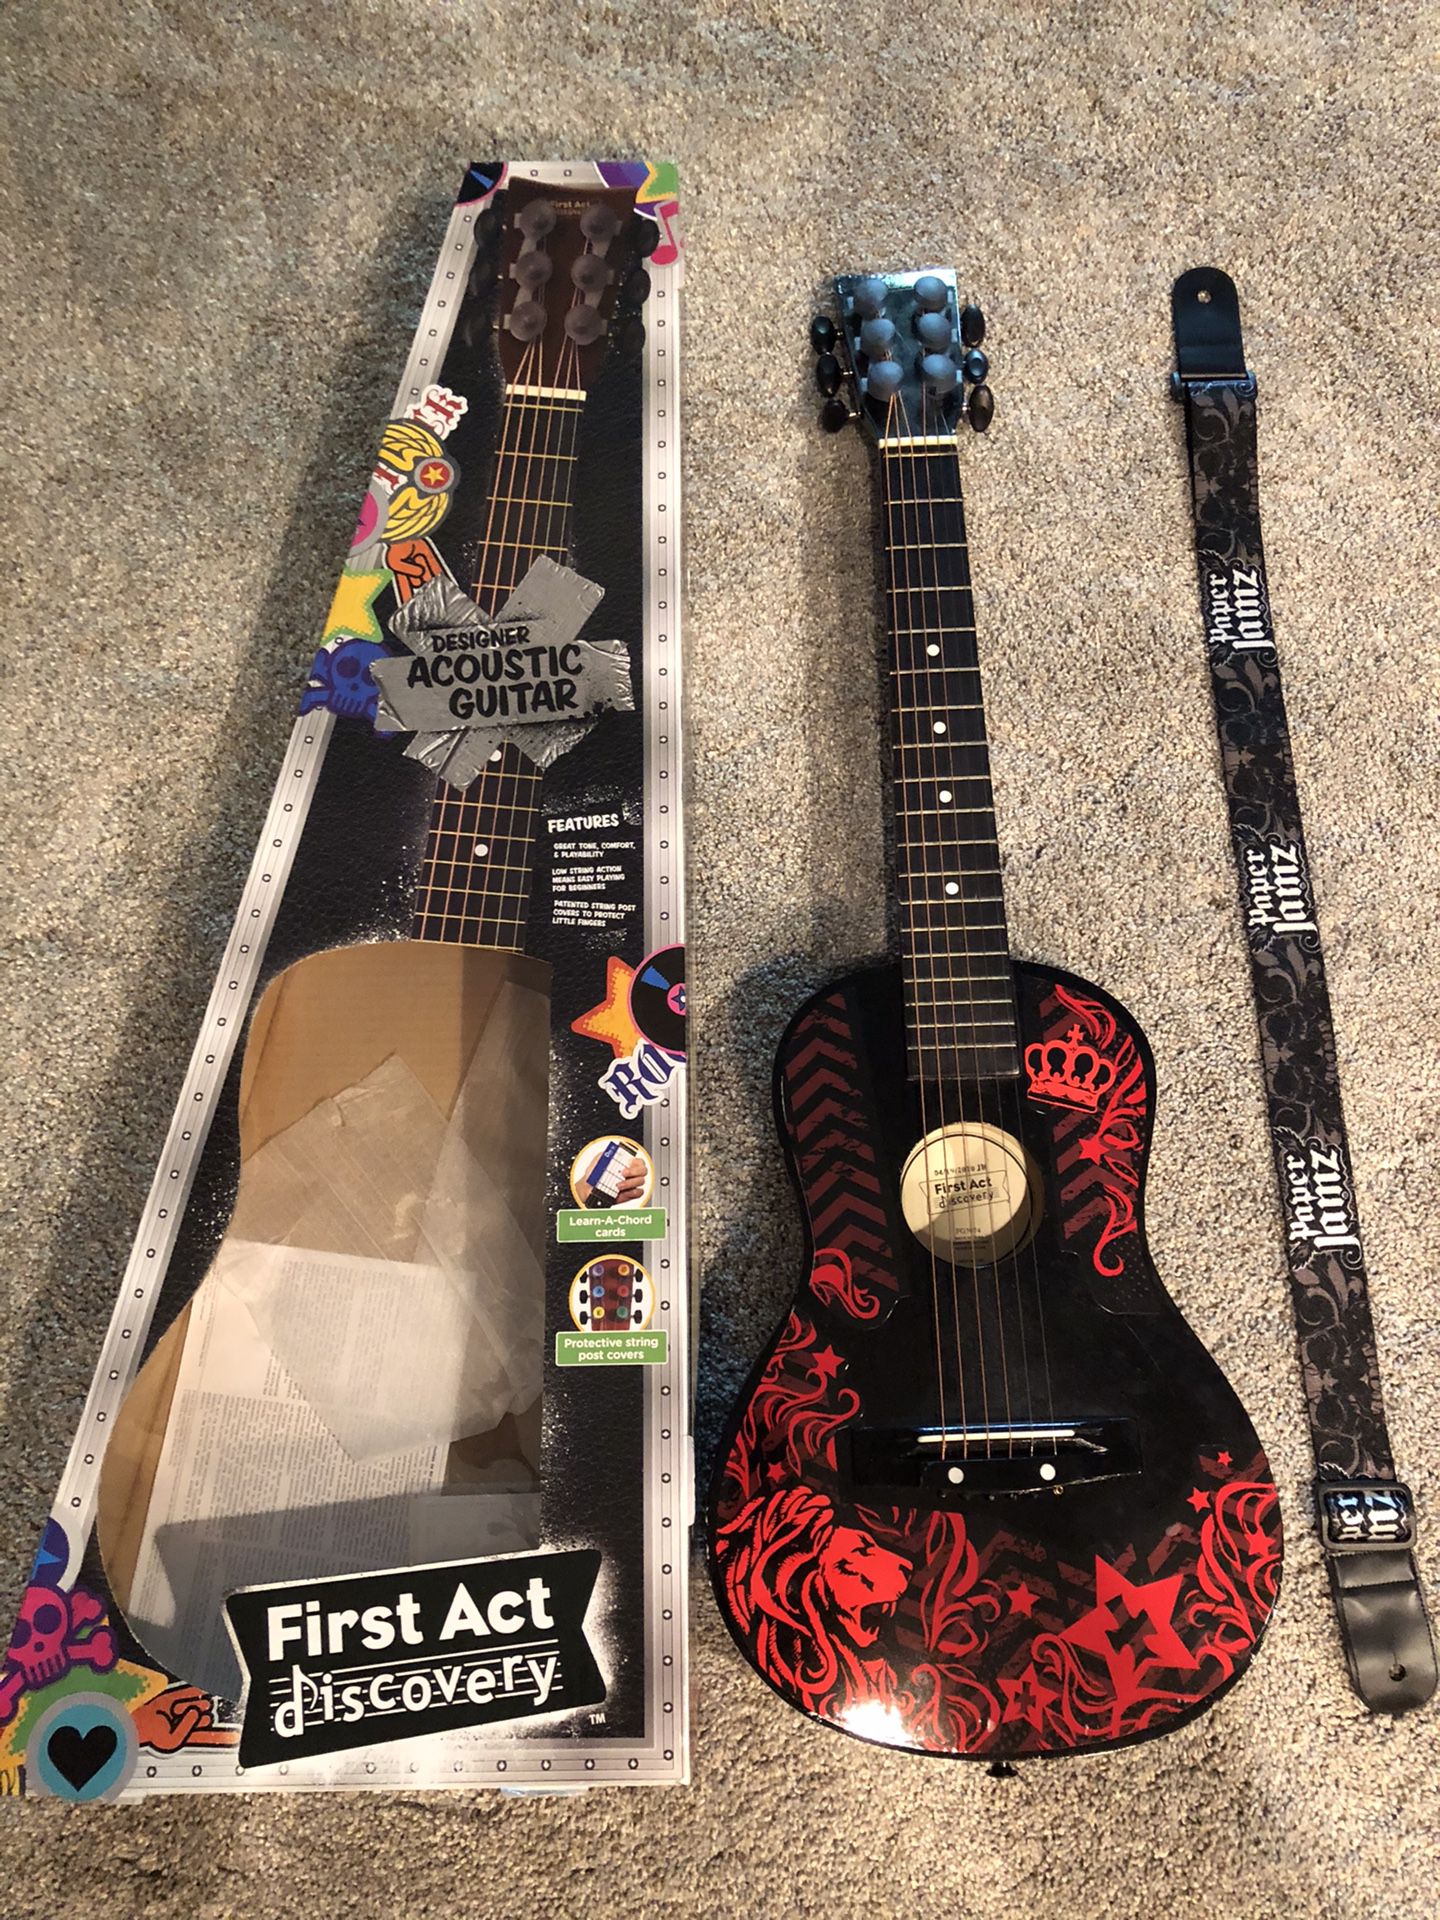 First Act Designer Acoustic Guitar with strap